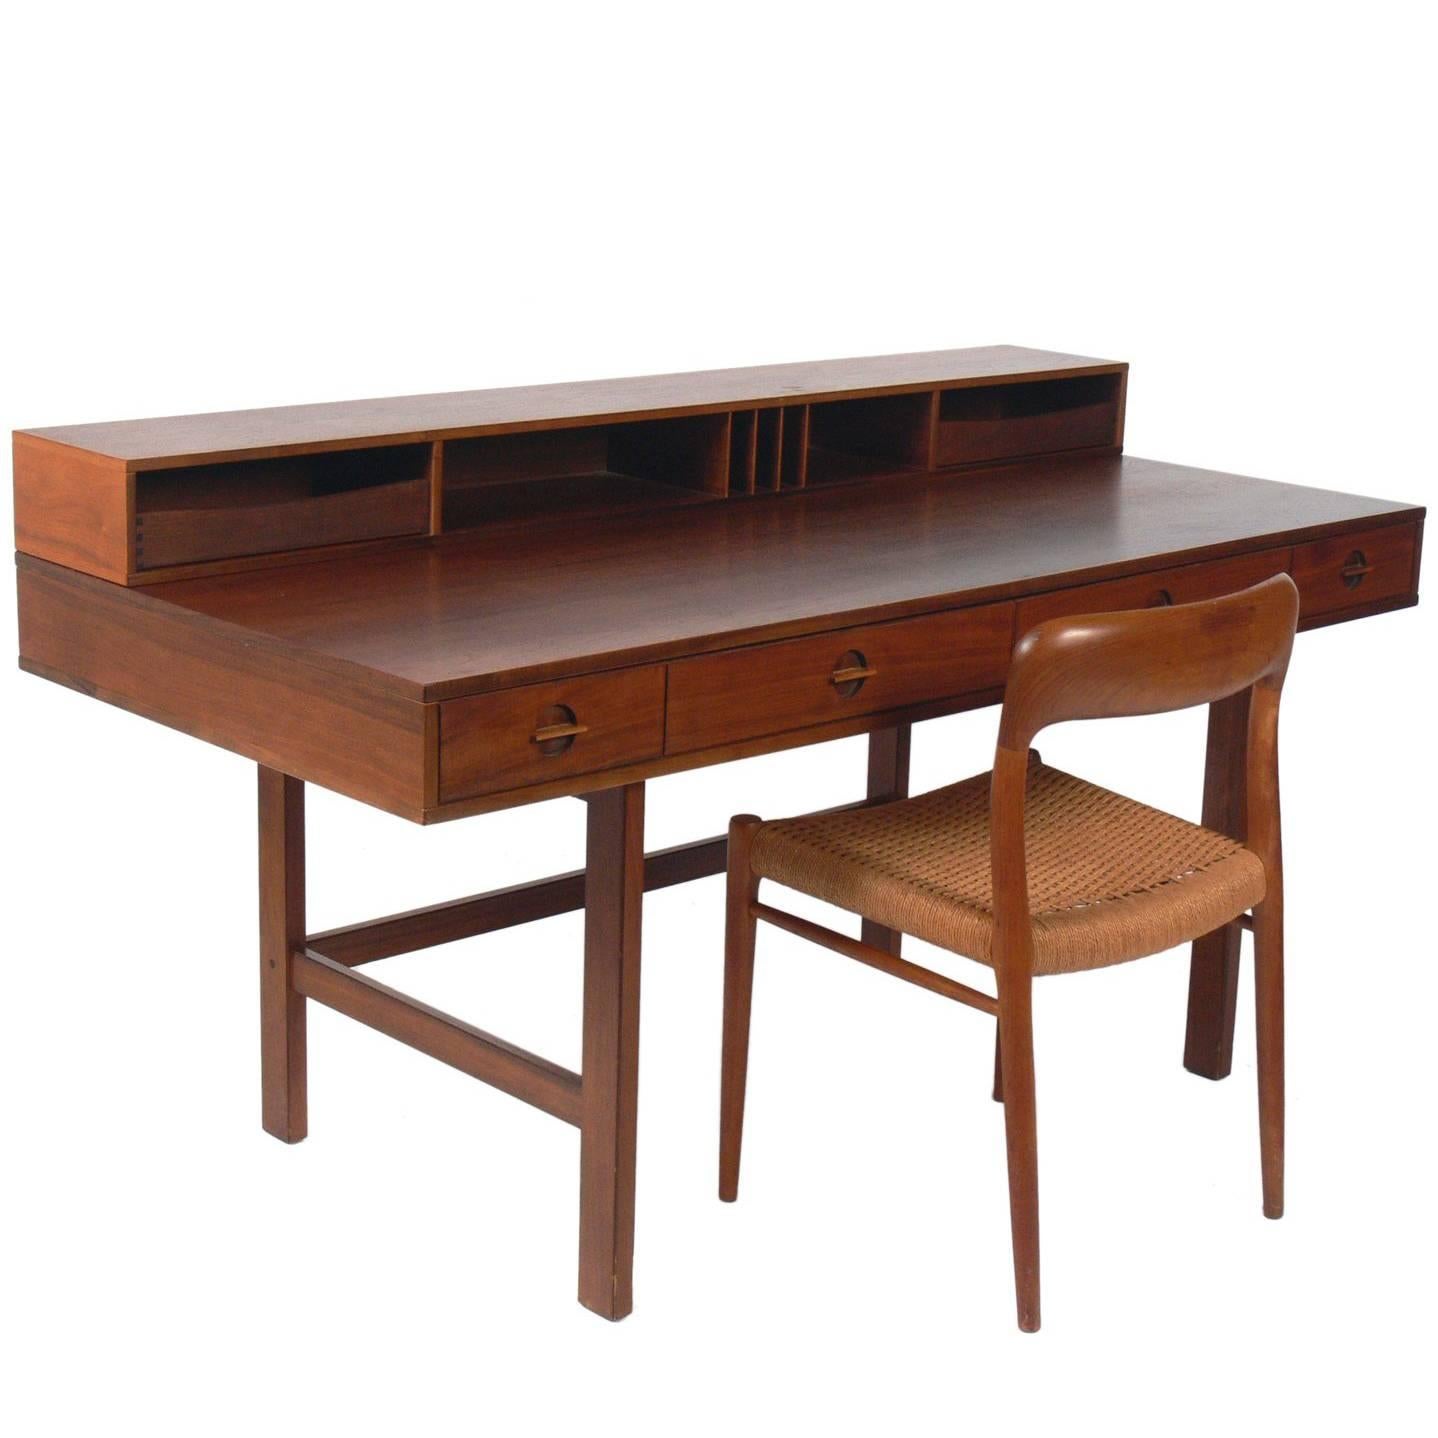 Clean Lined Architectural Danish Modern Desk and Chair by Quistgaard & Moller